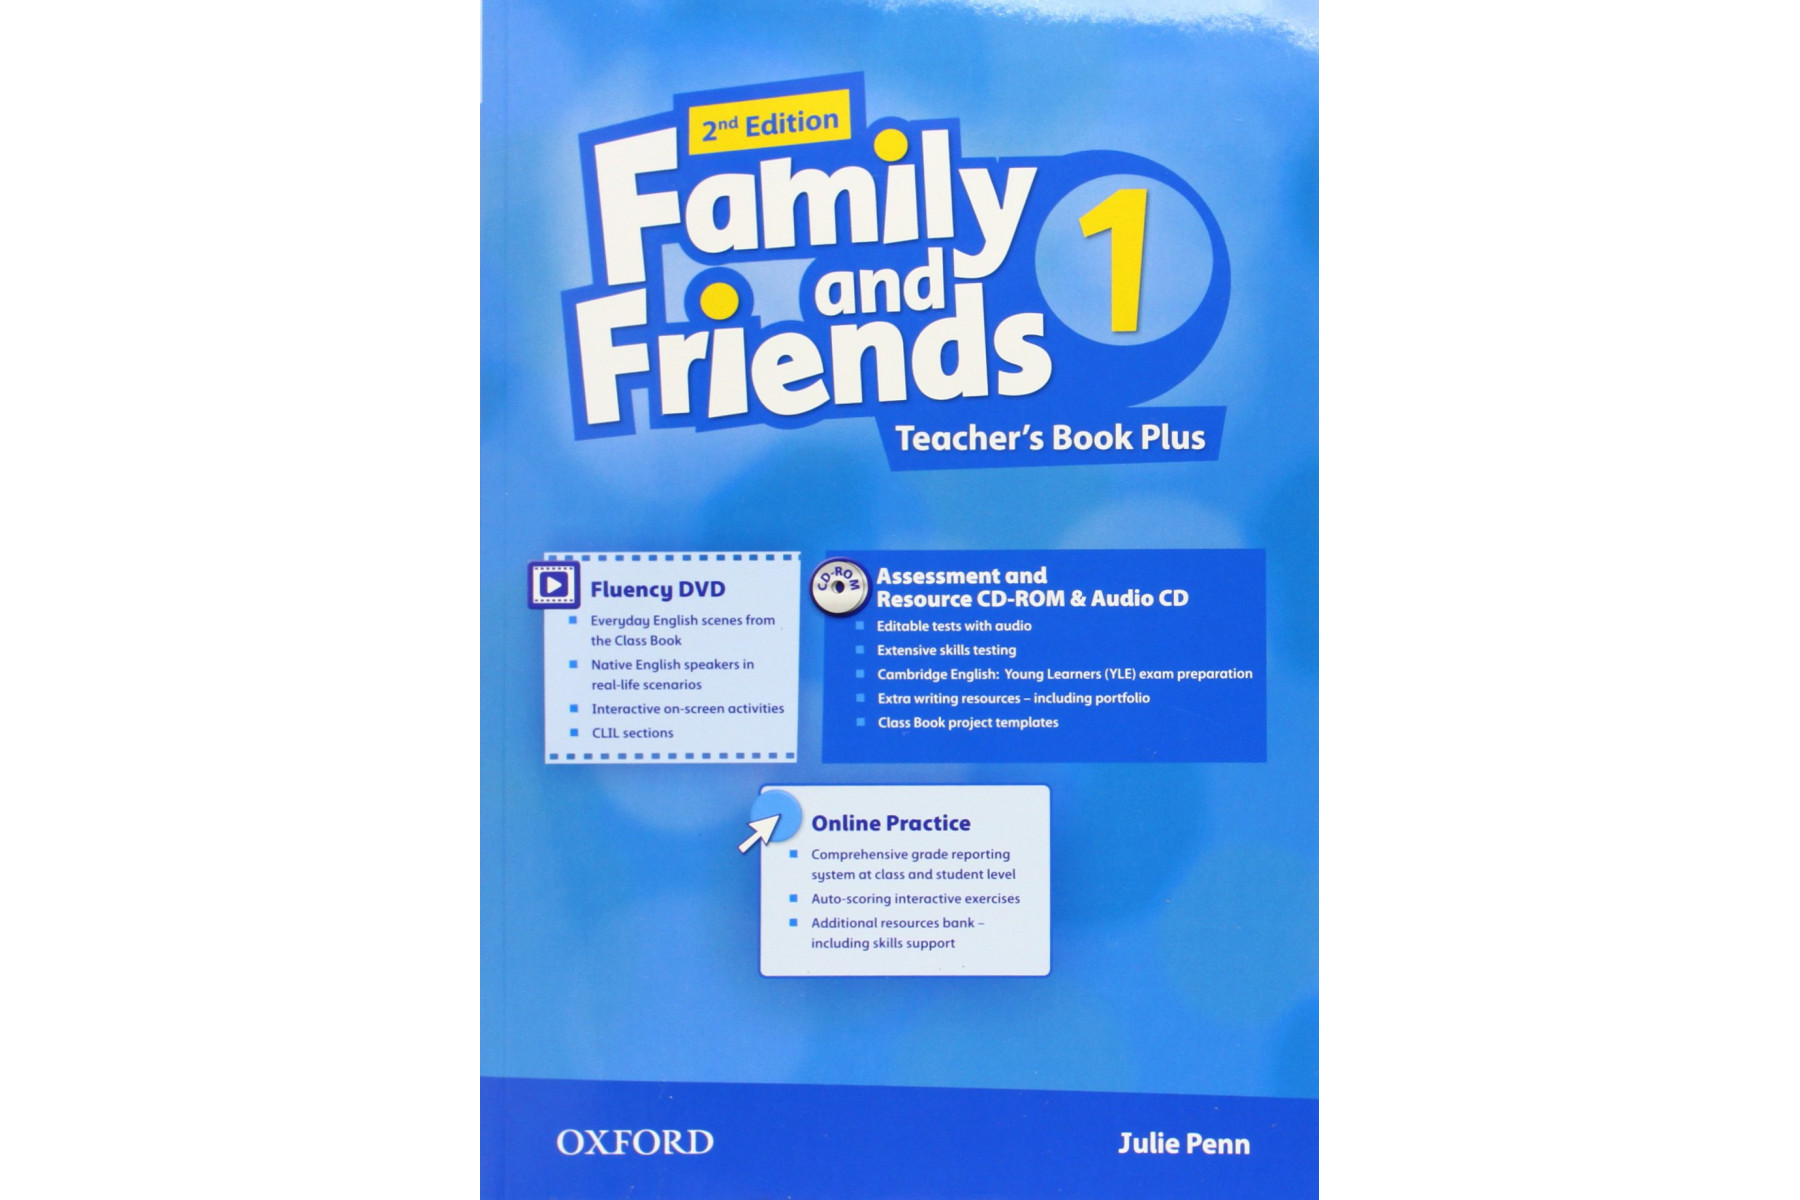 Family and Friends 2nd Edition 1 Teacher's Book Plus